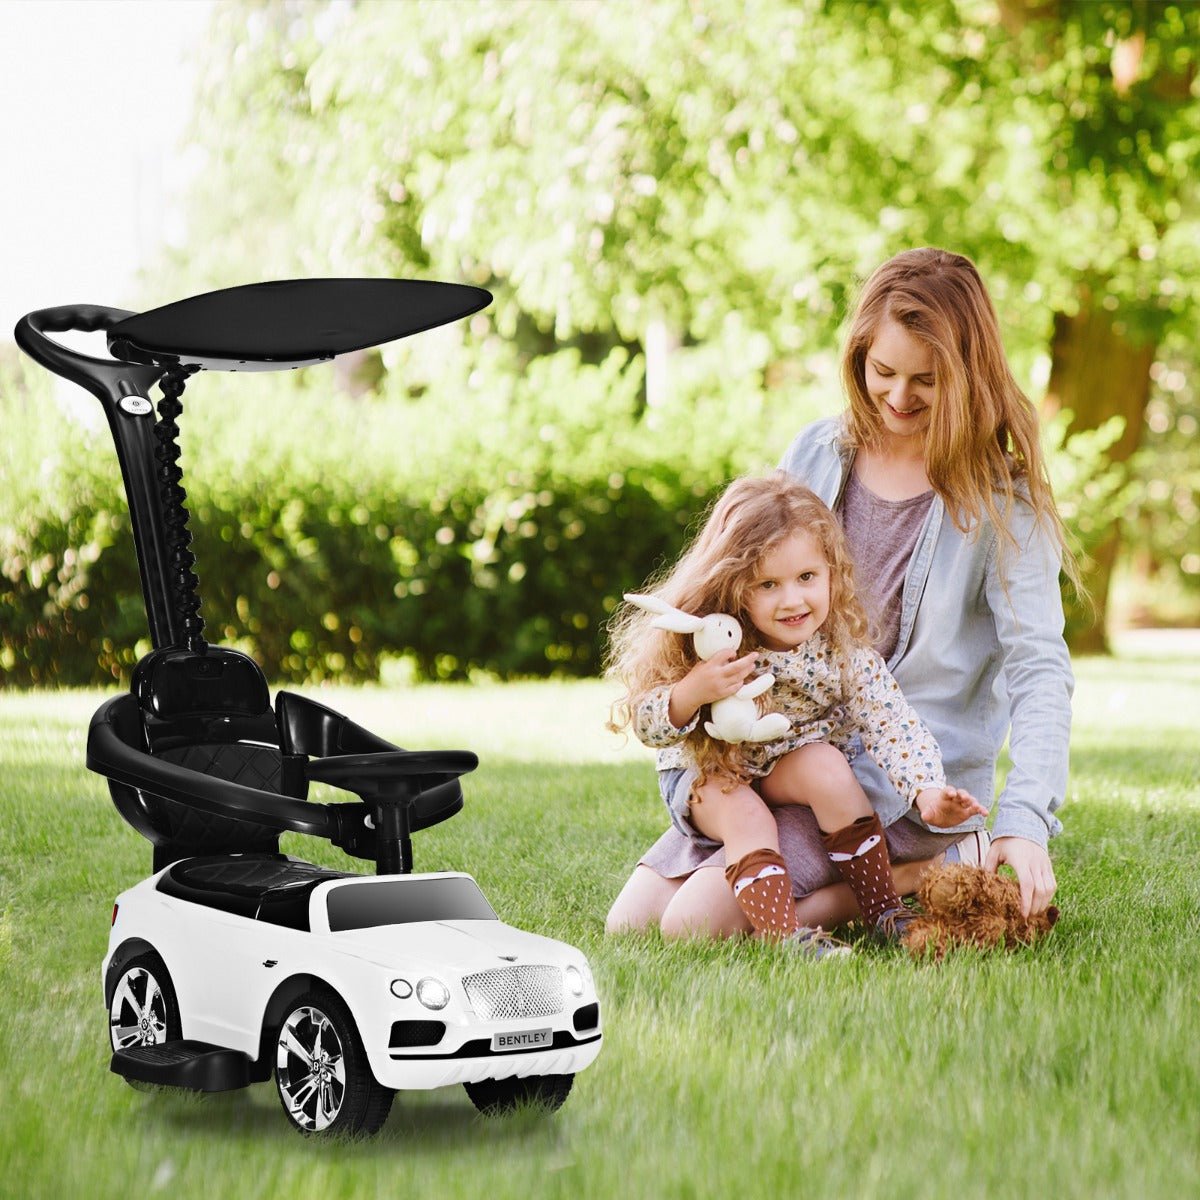 White Bentley Kids Ride On Push Car - Licensed Ride-On Toy with Canopy